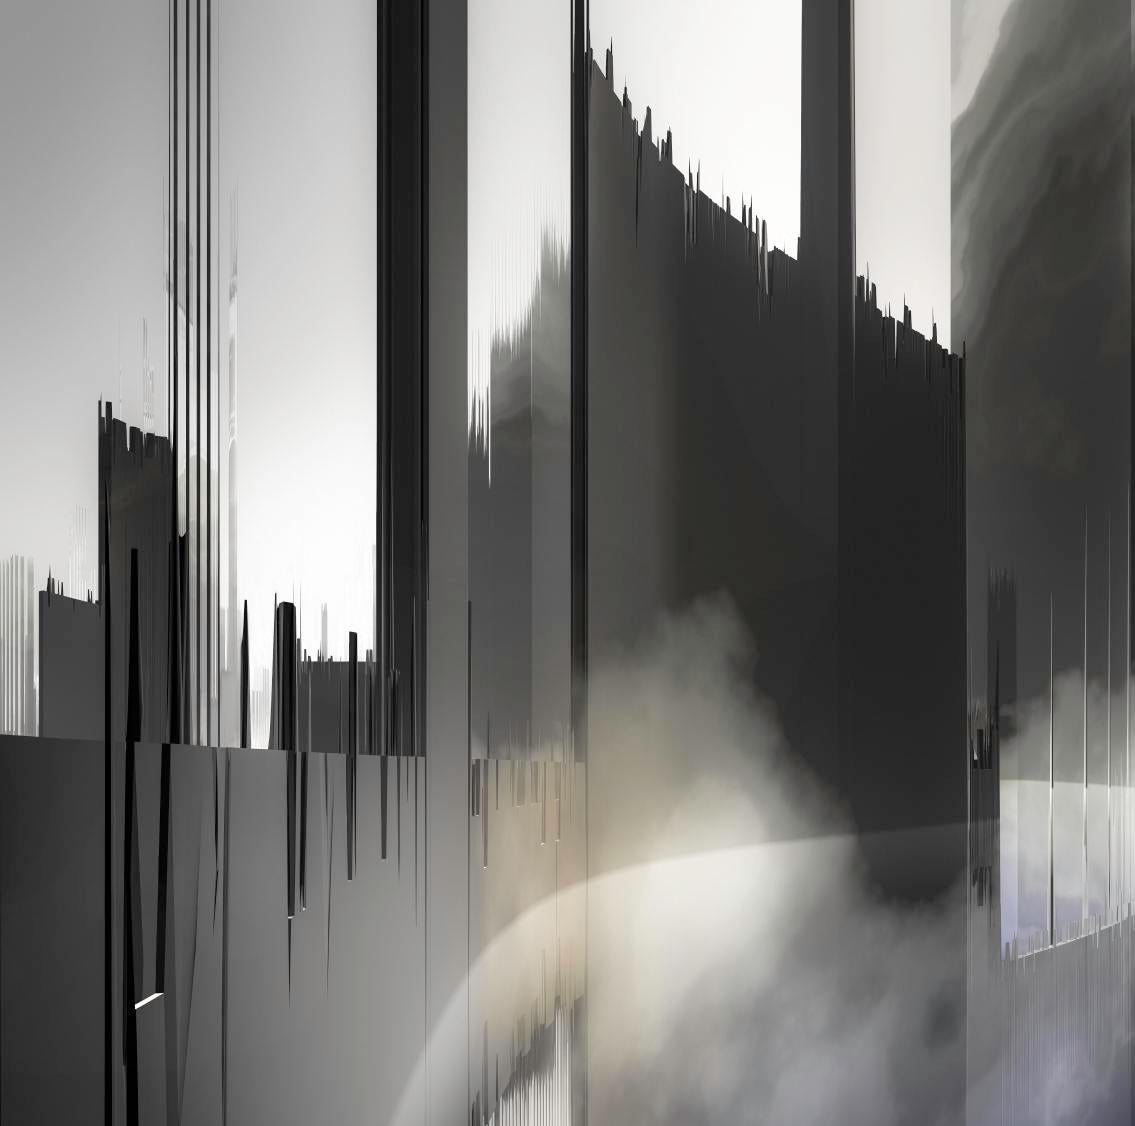 City Landcuts - Vision of a Urban Territory - Abstract Cityscapes - Black Landscape Photograph by Paul-Émile Rioux